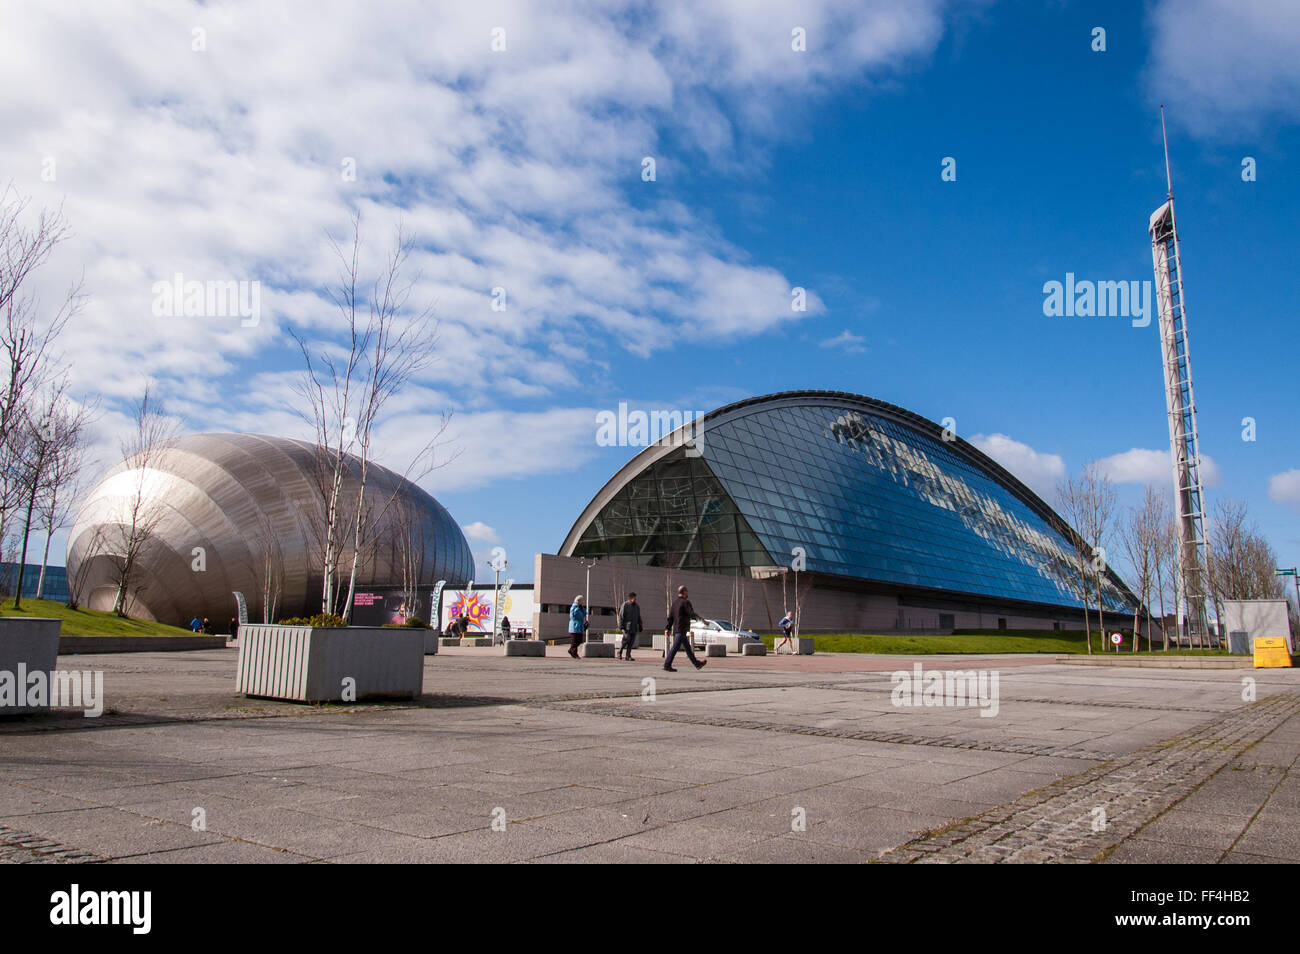 View of Glasgow science museum and Imax cinema in a sunny day (Scotland, UK) Stock Photo